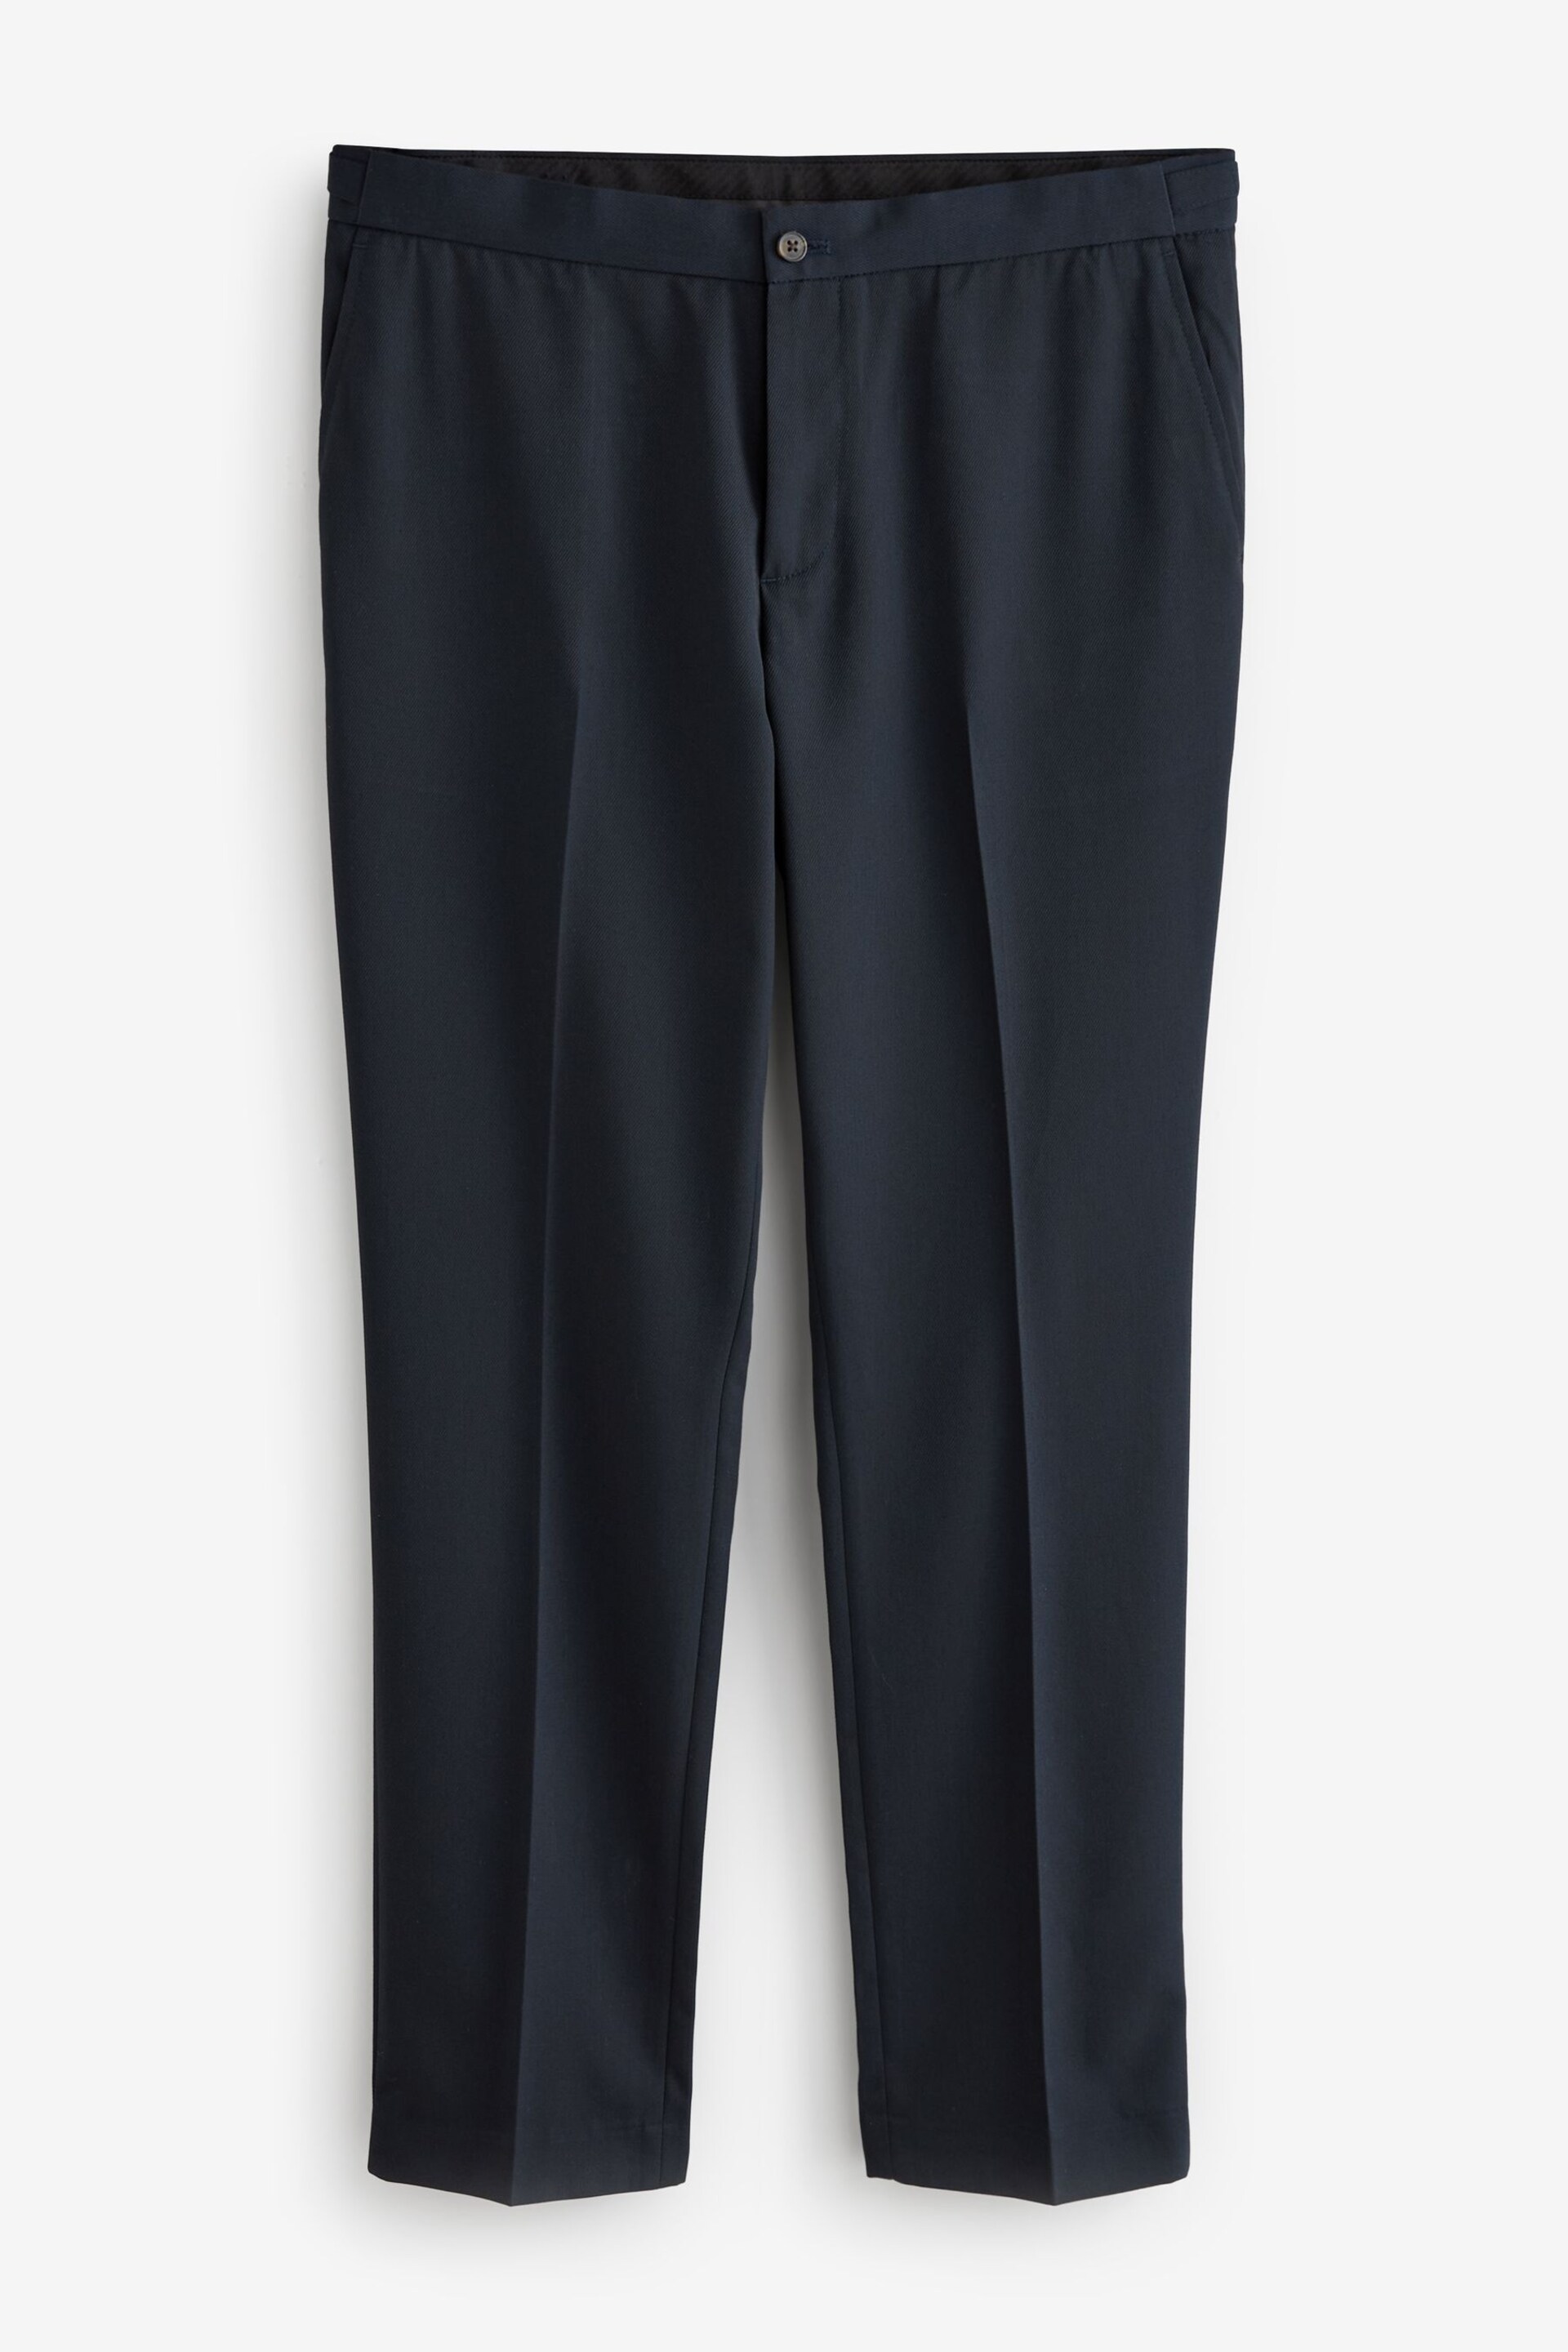 Navy Blue Slim Fit Smart Twill Side Adjuster Trousers - Image 8 of 9